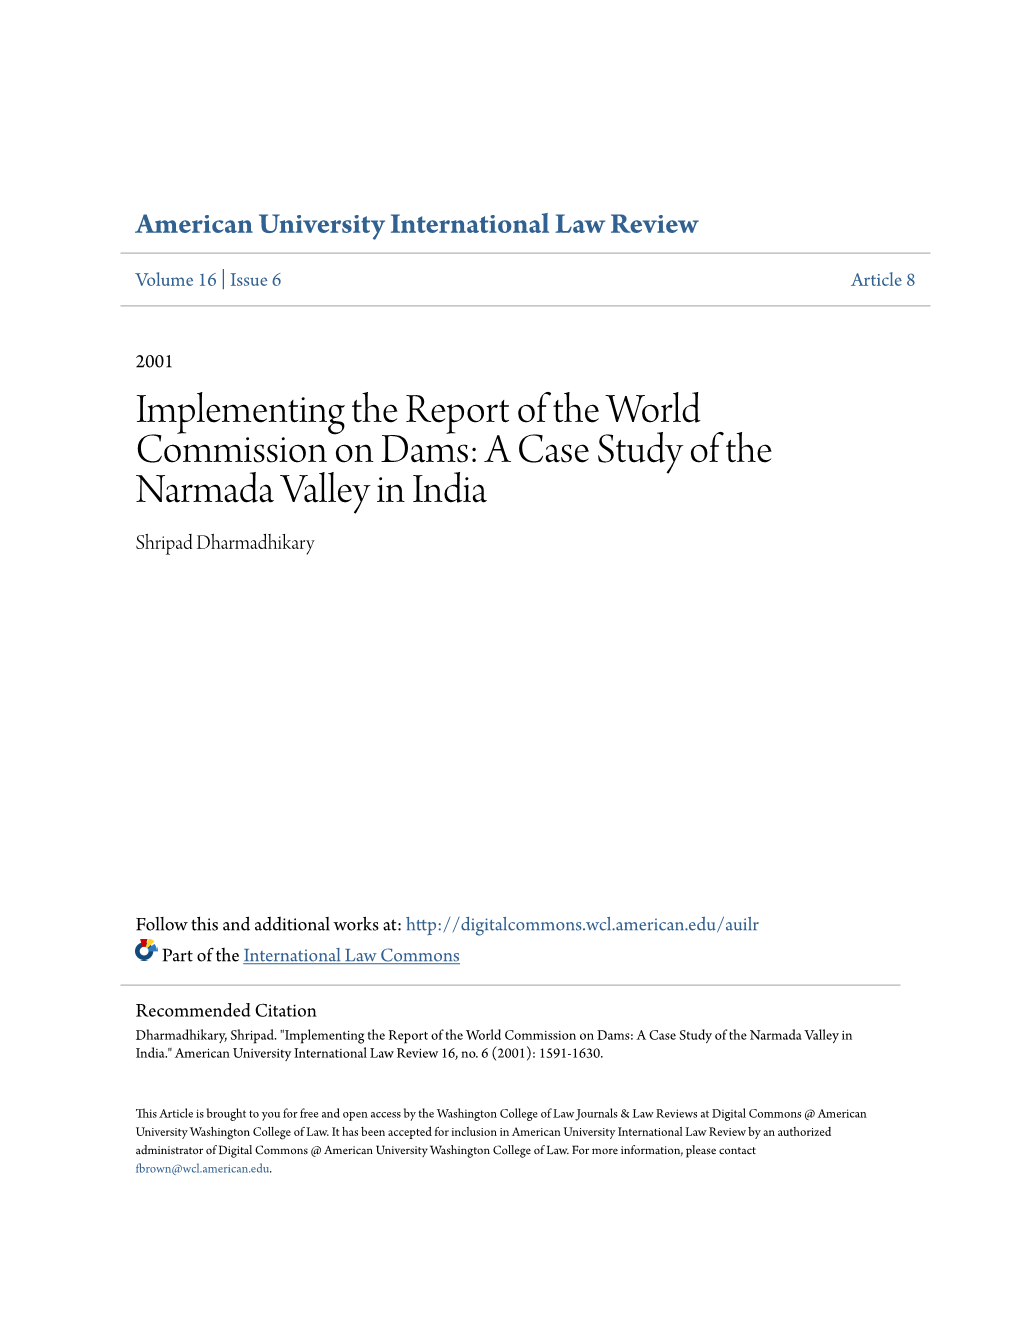 Implementing the Report of the World Commission on Dams: a Case Study of the Narmada Valley in India Shripad Dharmadhikary